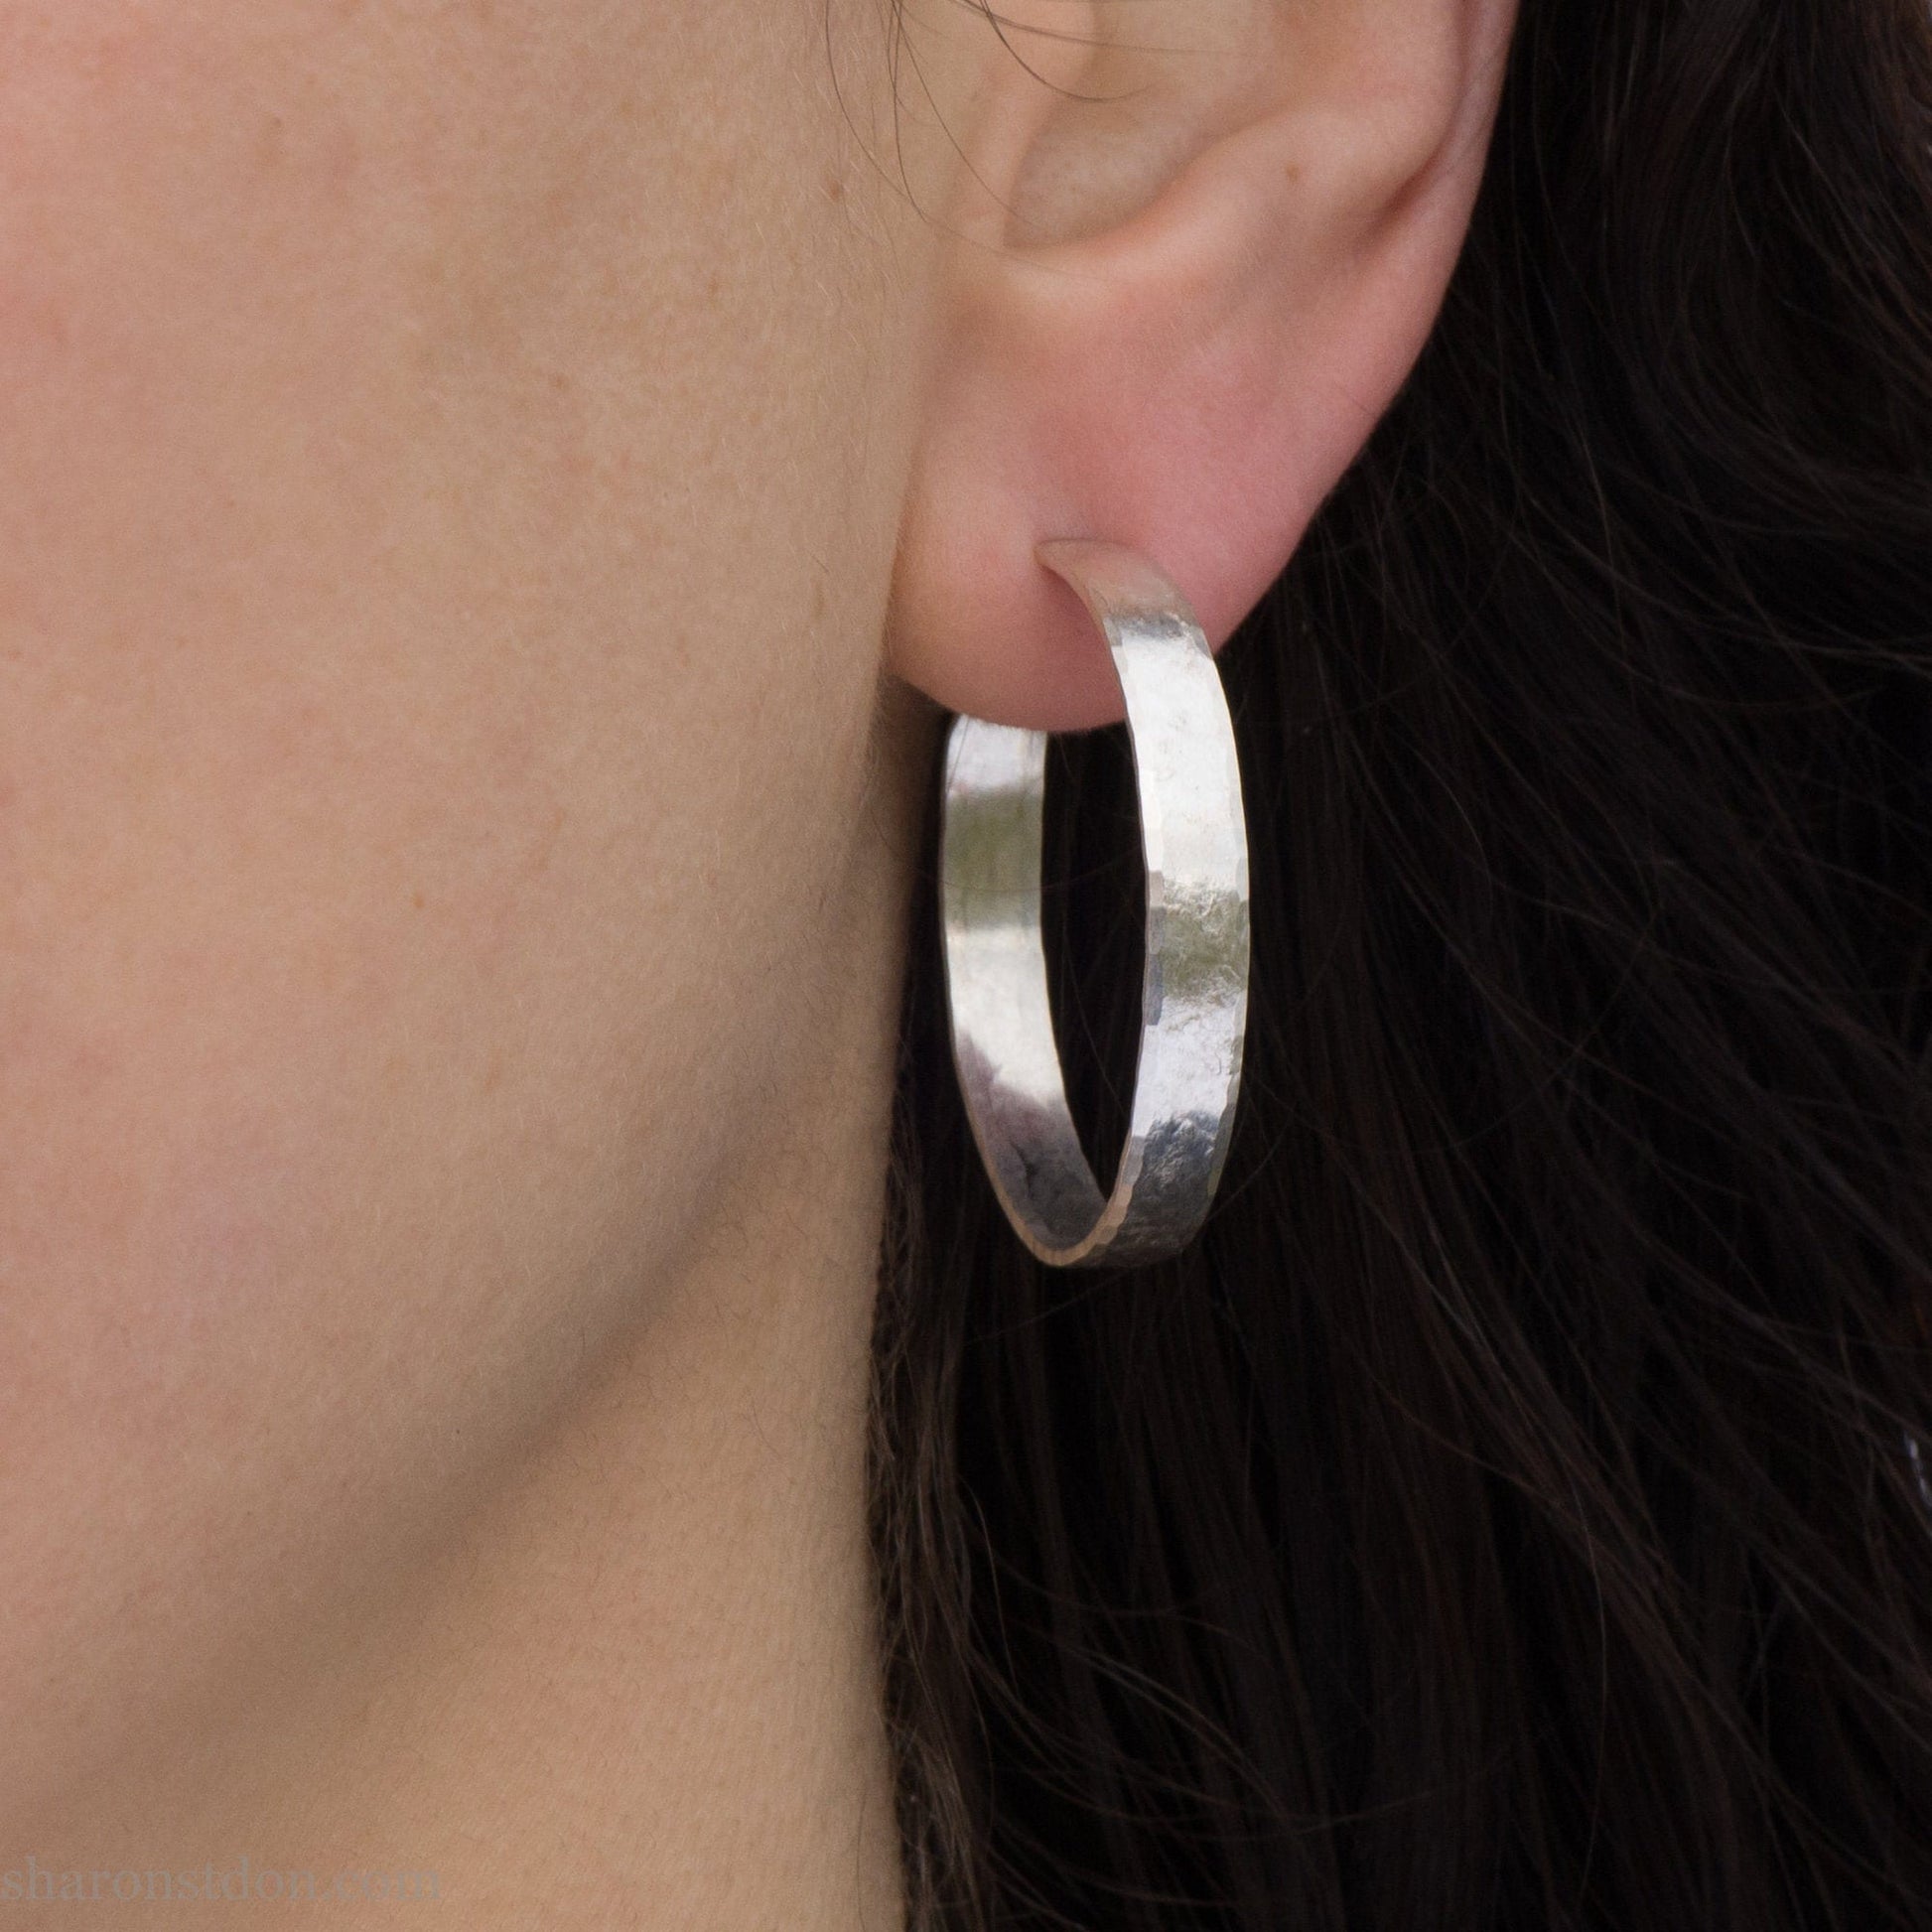 Handmade 925 sterling silver hoop earrings for women. Comfortable, lightweight, daily wear earrings with a hammered texture.